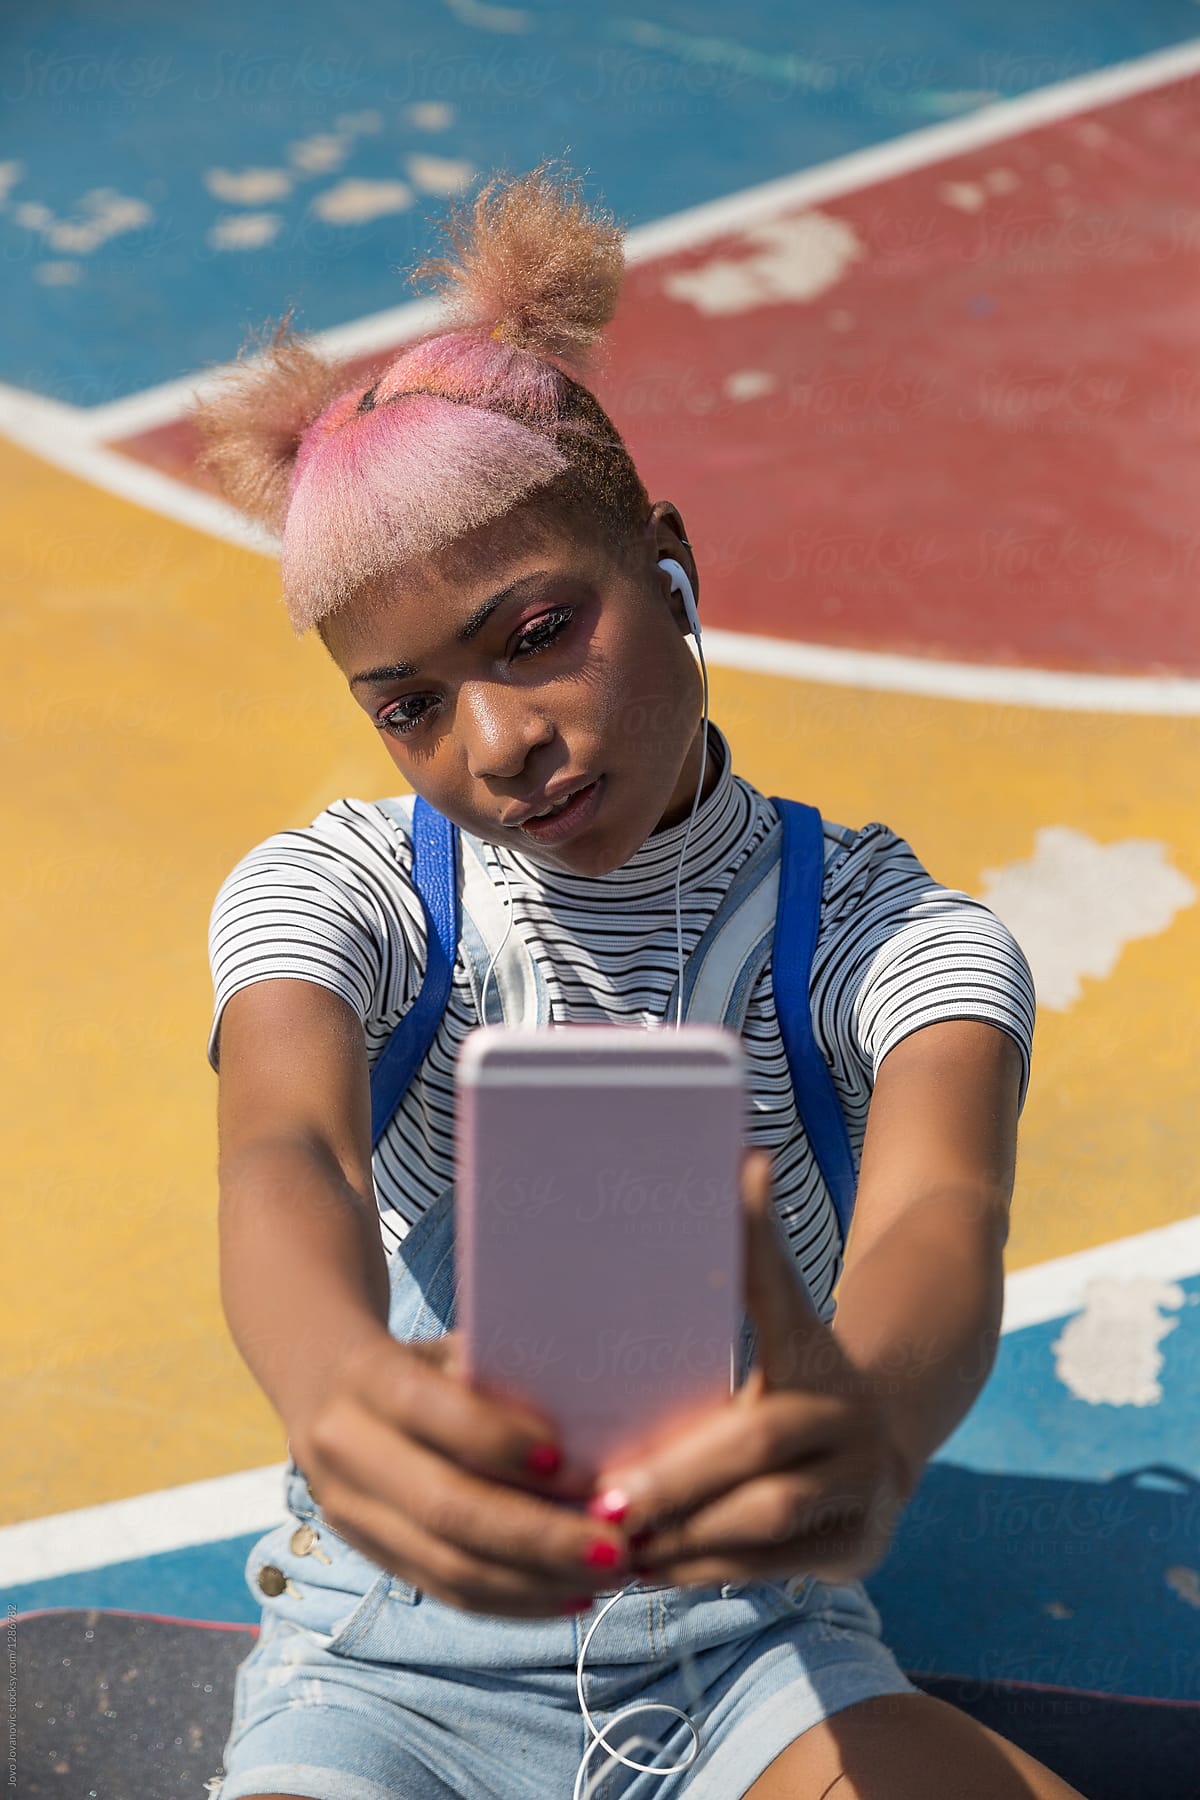 Young woman with pink hair taking a selfie